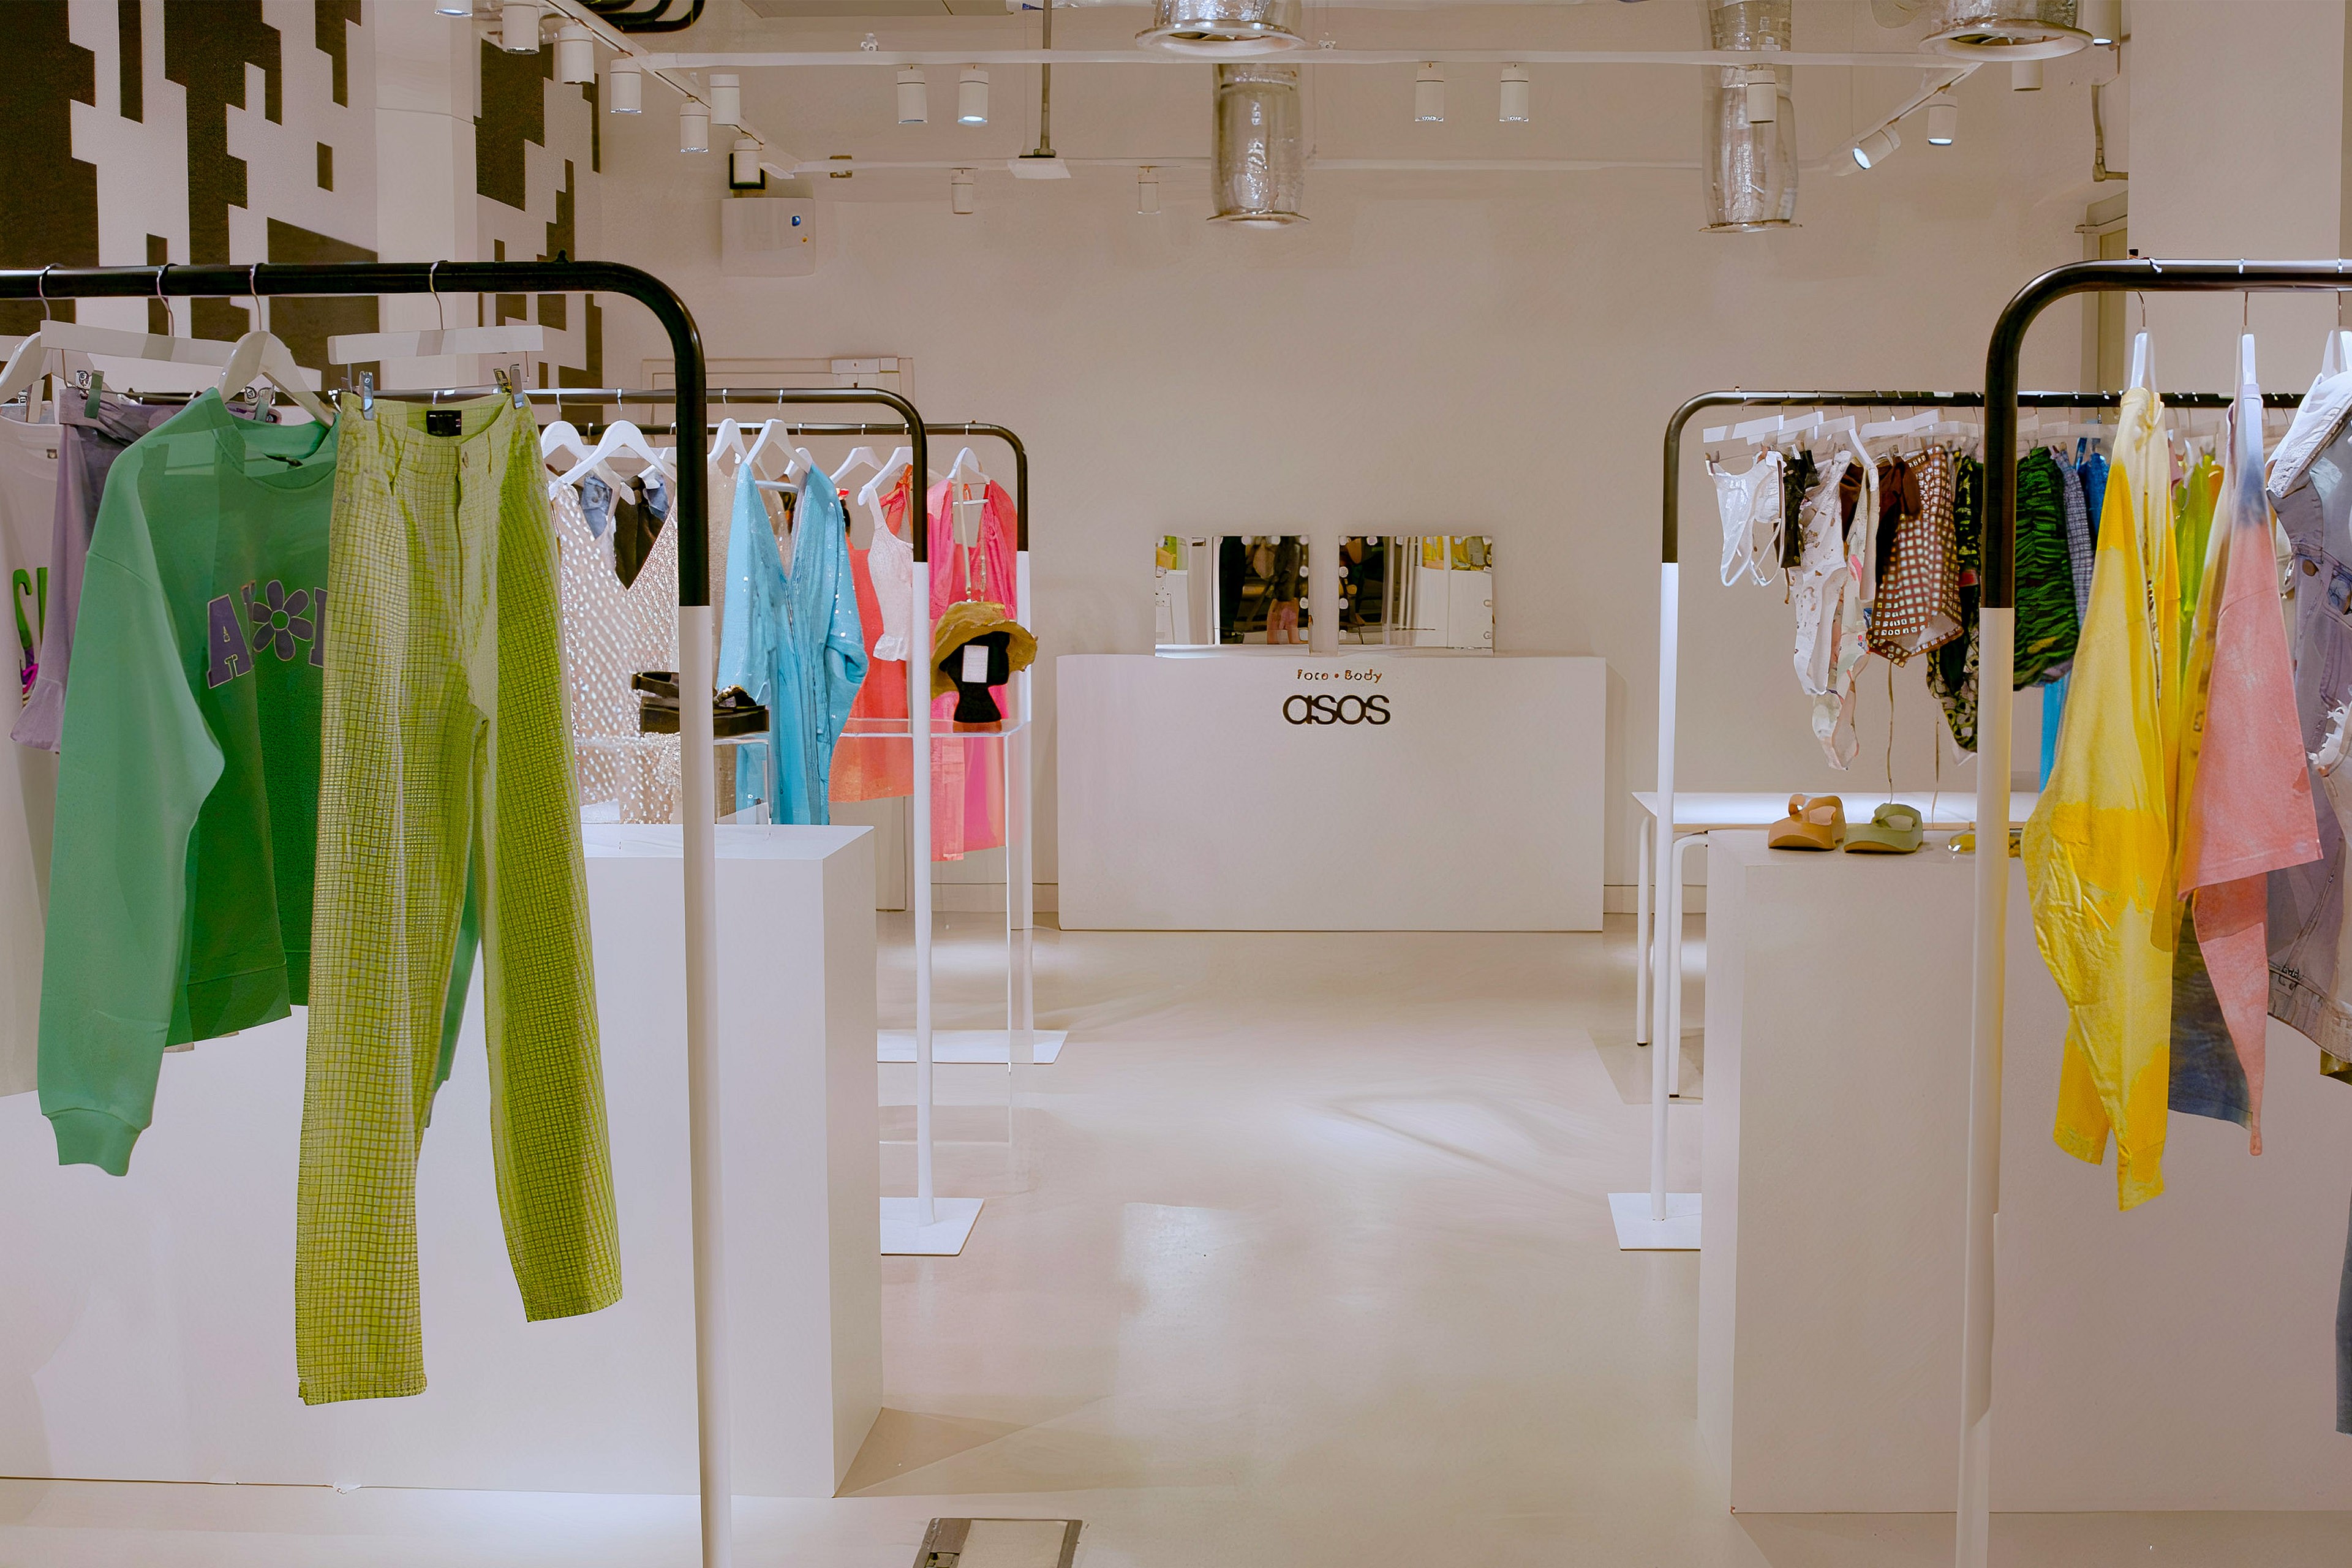 Fashioning a sustainable future for an online clothing retailer